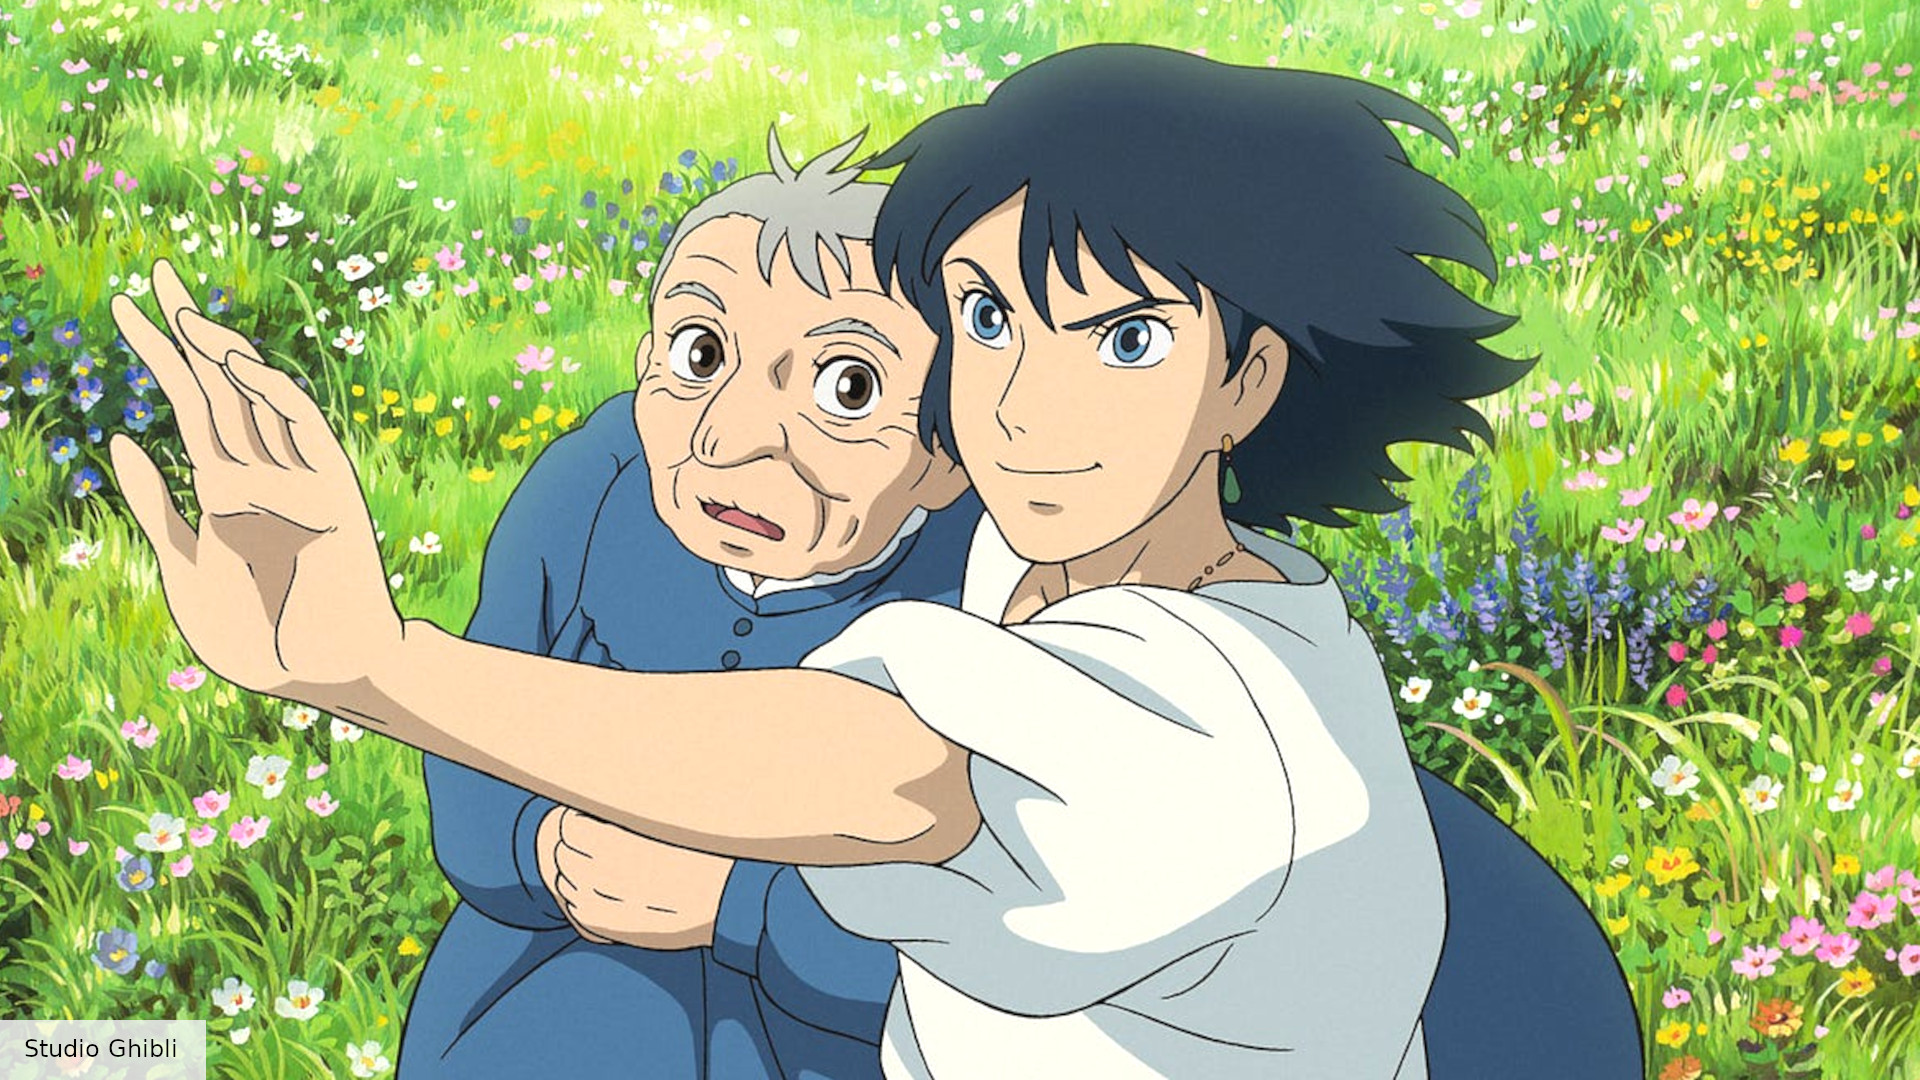 Ranking: Every Studio Ghibli Movie from Worst to Best